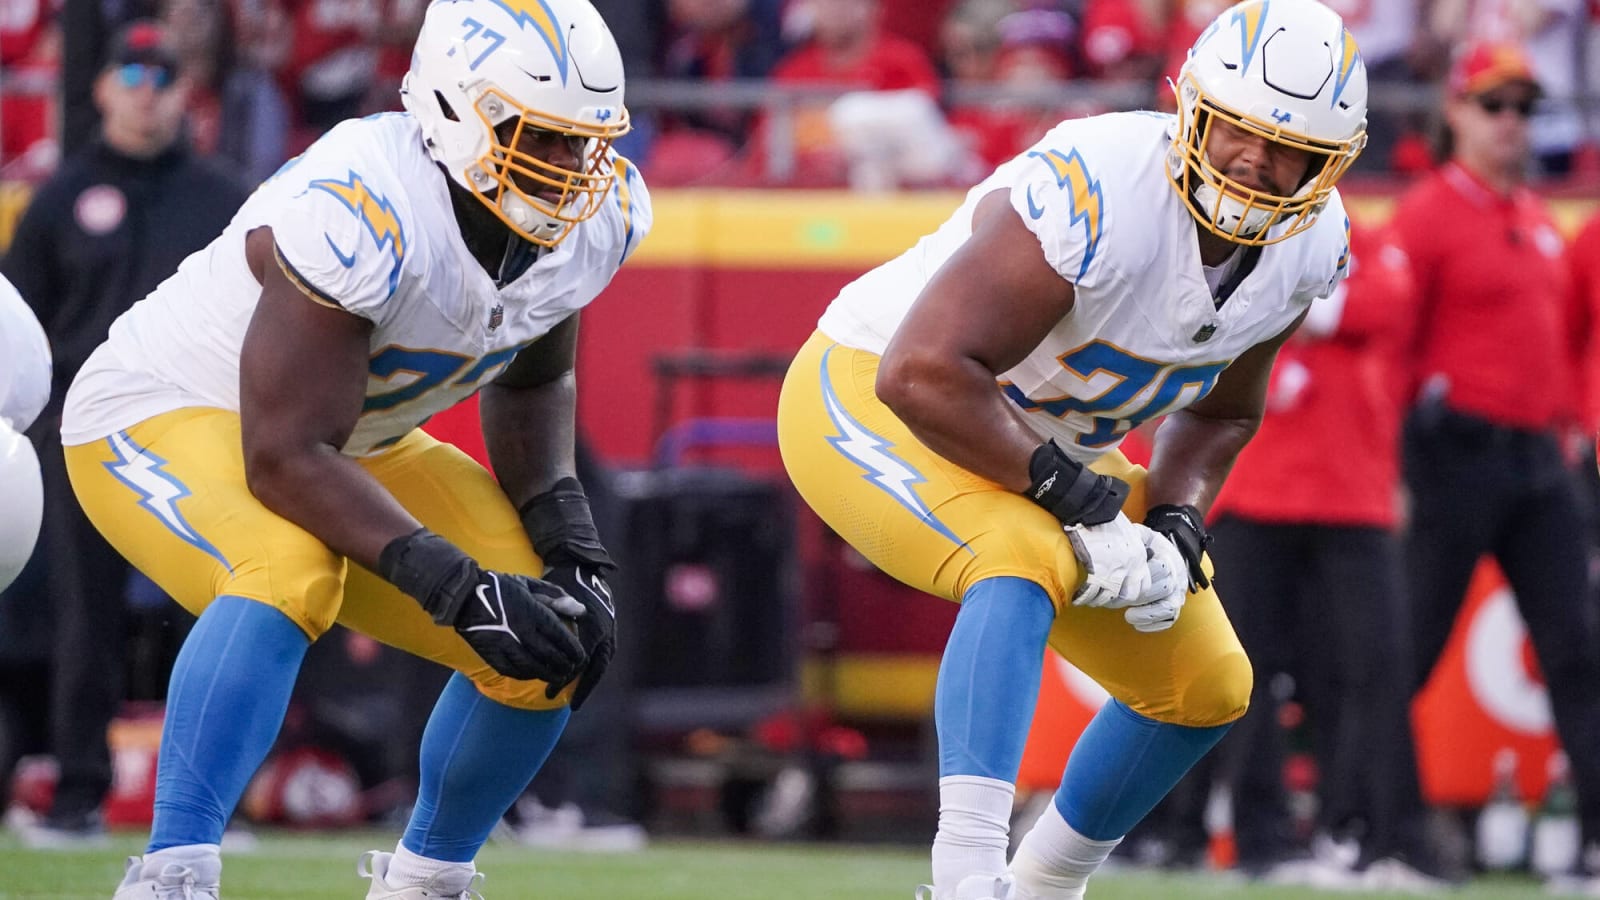 Chargers vs Patriots – The Offensive Line Showdown